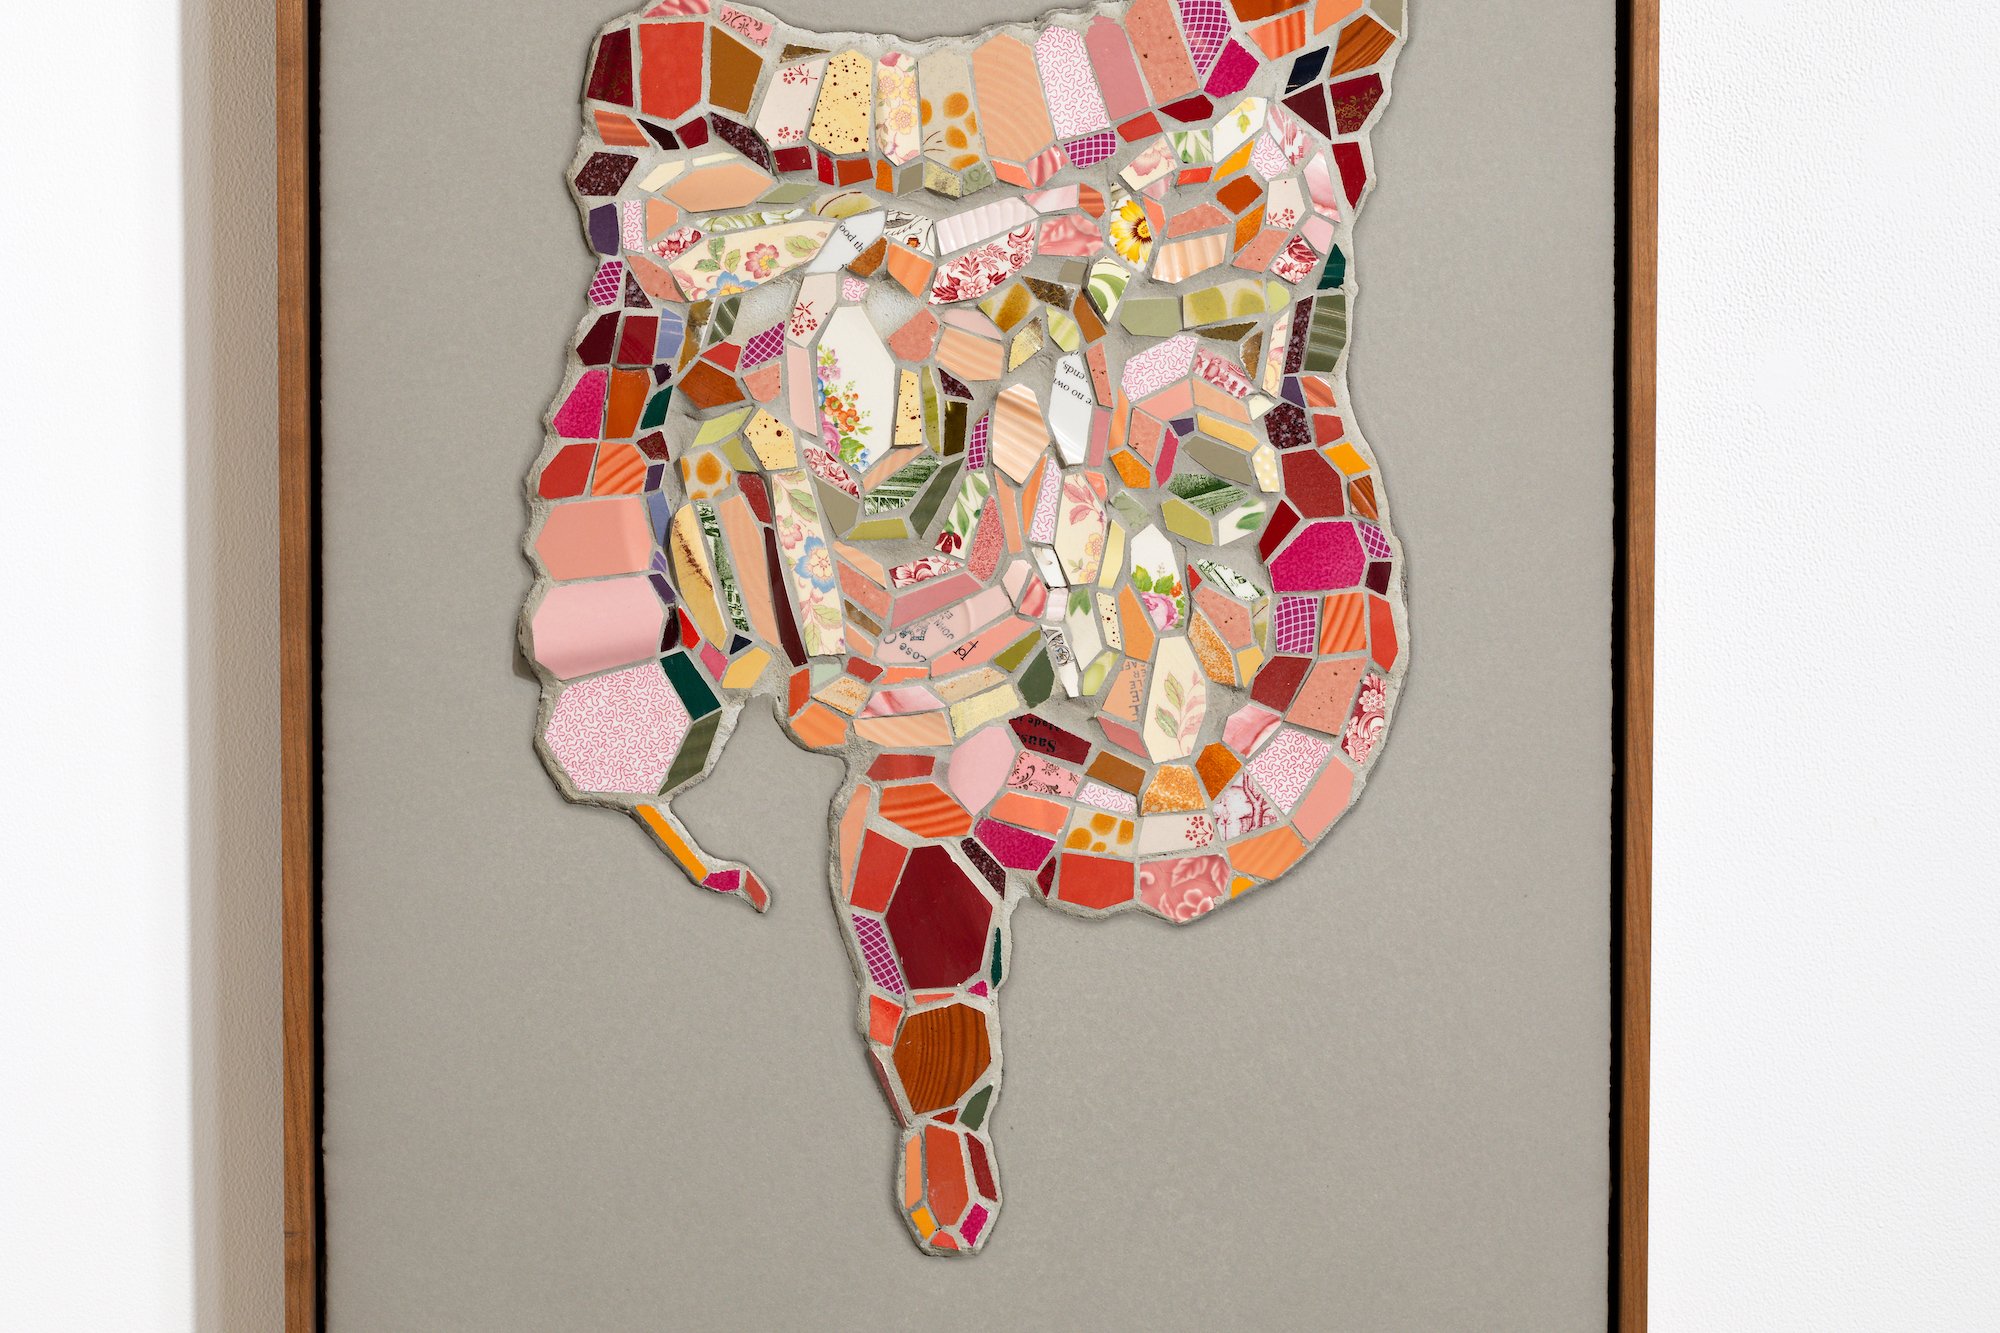 "Relief" Mixed Media Mosaic by Mary Lacy @ Soapbox Arts Gallery, Burlington, Vermont